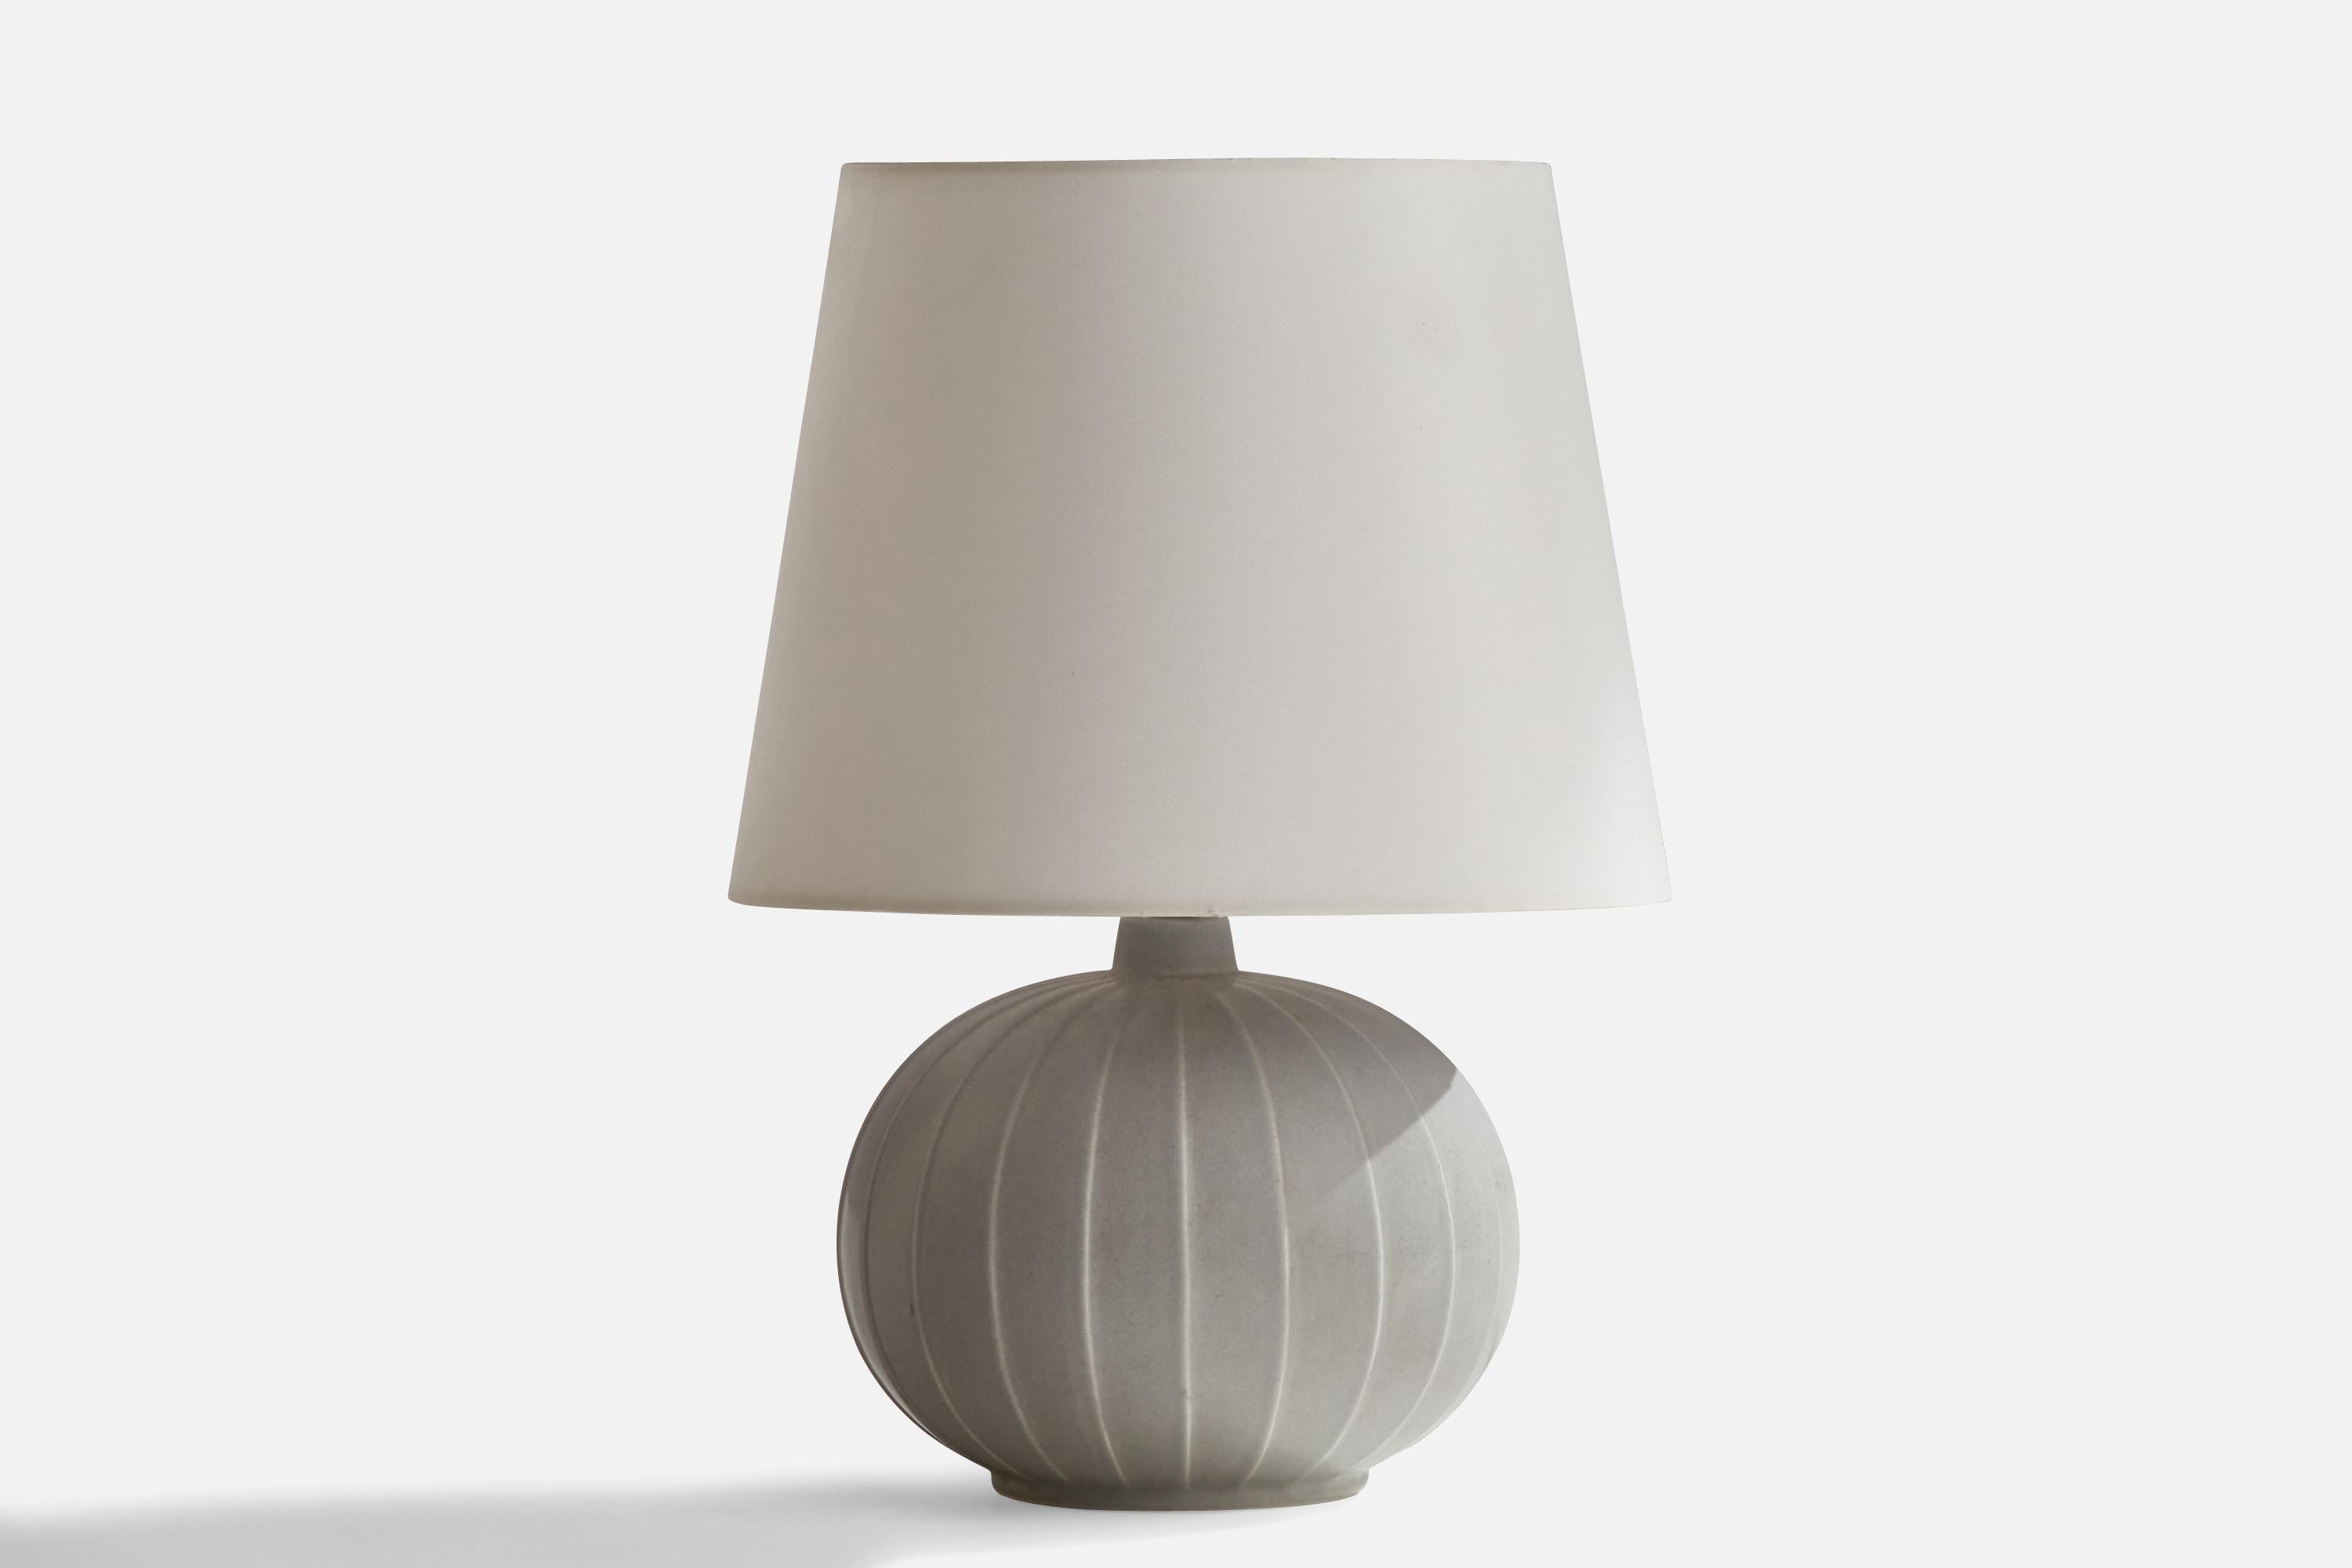 A fluted light-grey stoneware table lamp, design attributed to Gertrud Lönegren produced by Rörstrand, c. 1940s.

Dimensions of Lamp (inches): 13.75” H x 7” Diameter
Dimensions of Shade (inches): 7.5” Top Diameter x 10”  Bottom Diameter x 8”